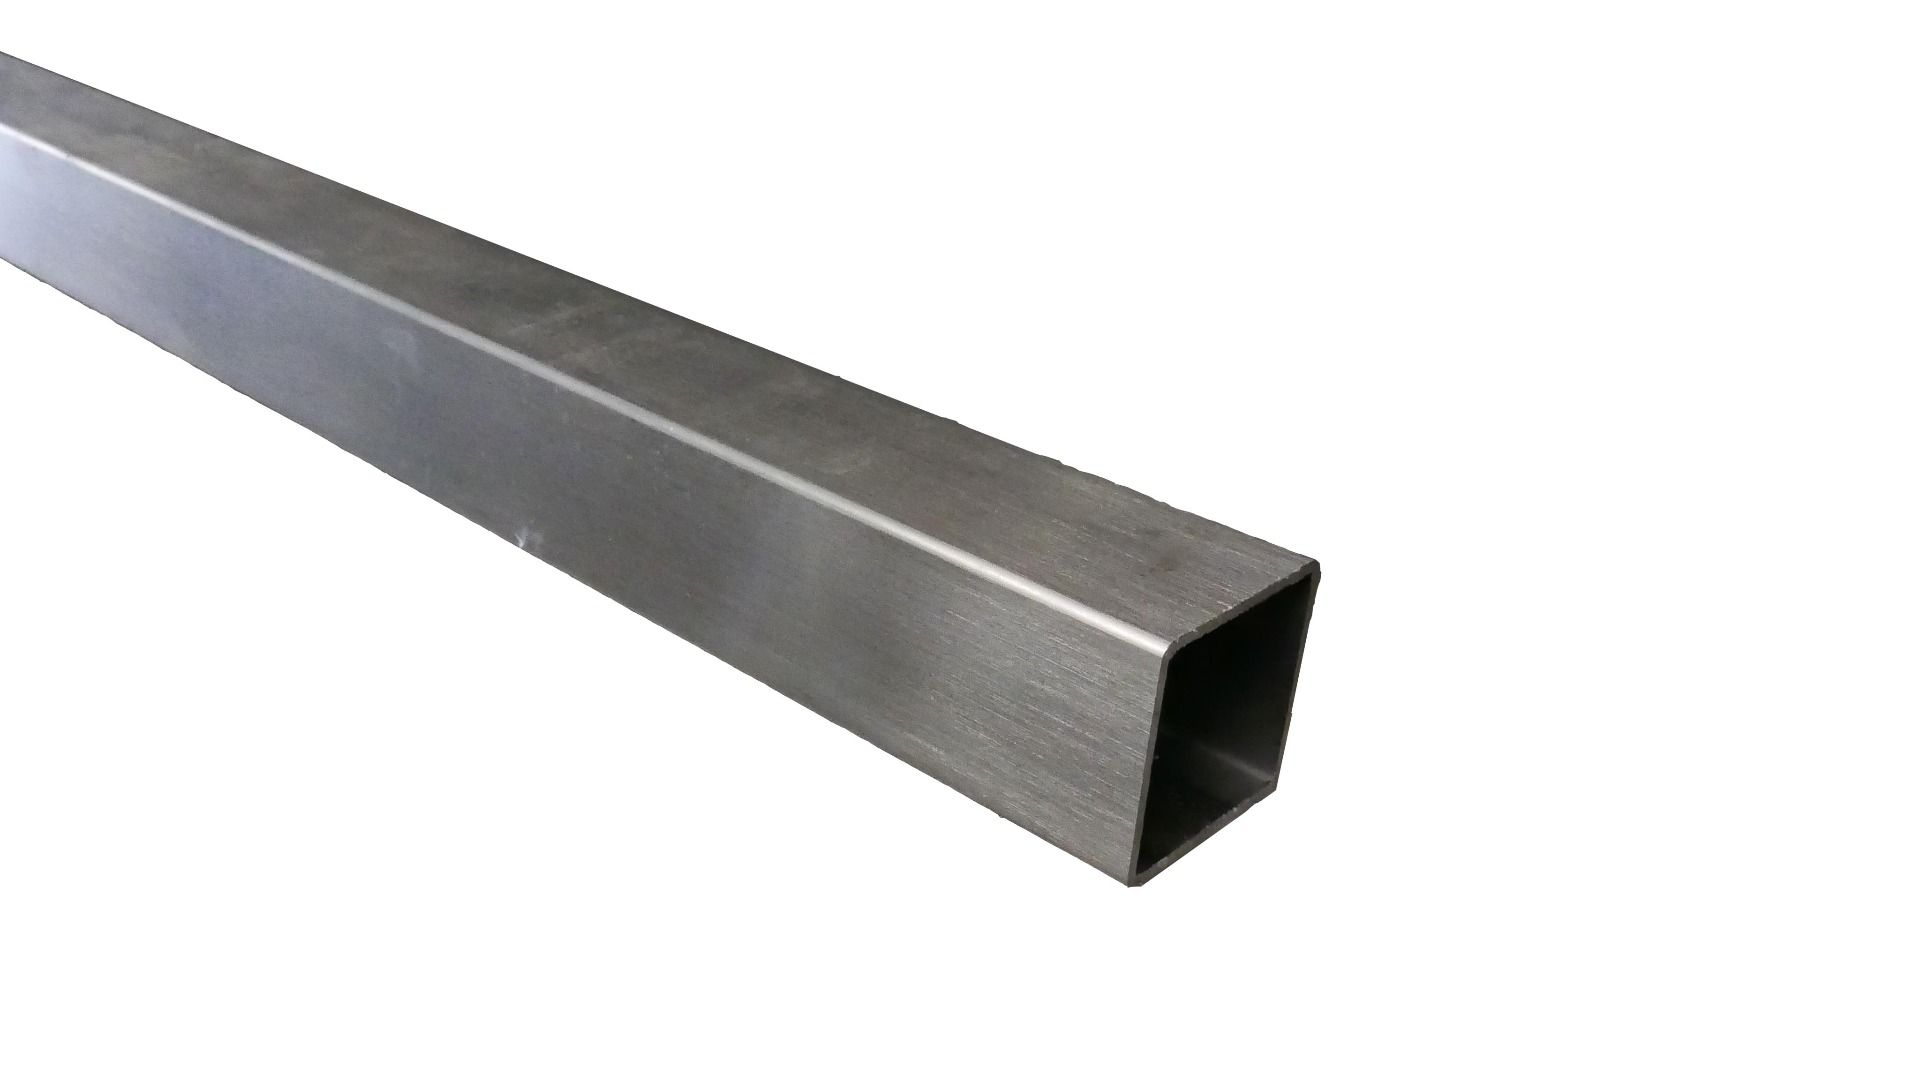 Aluminium Square Tube Box Section sizes 1" 2" 3" Cut to any length and quantity